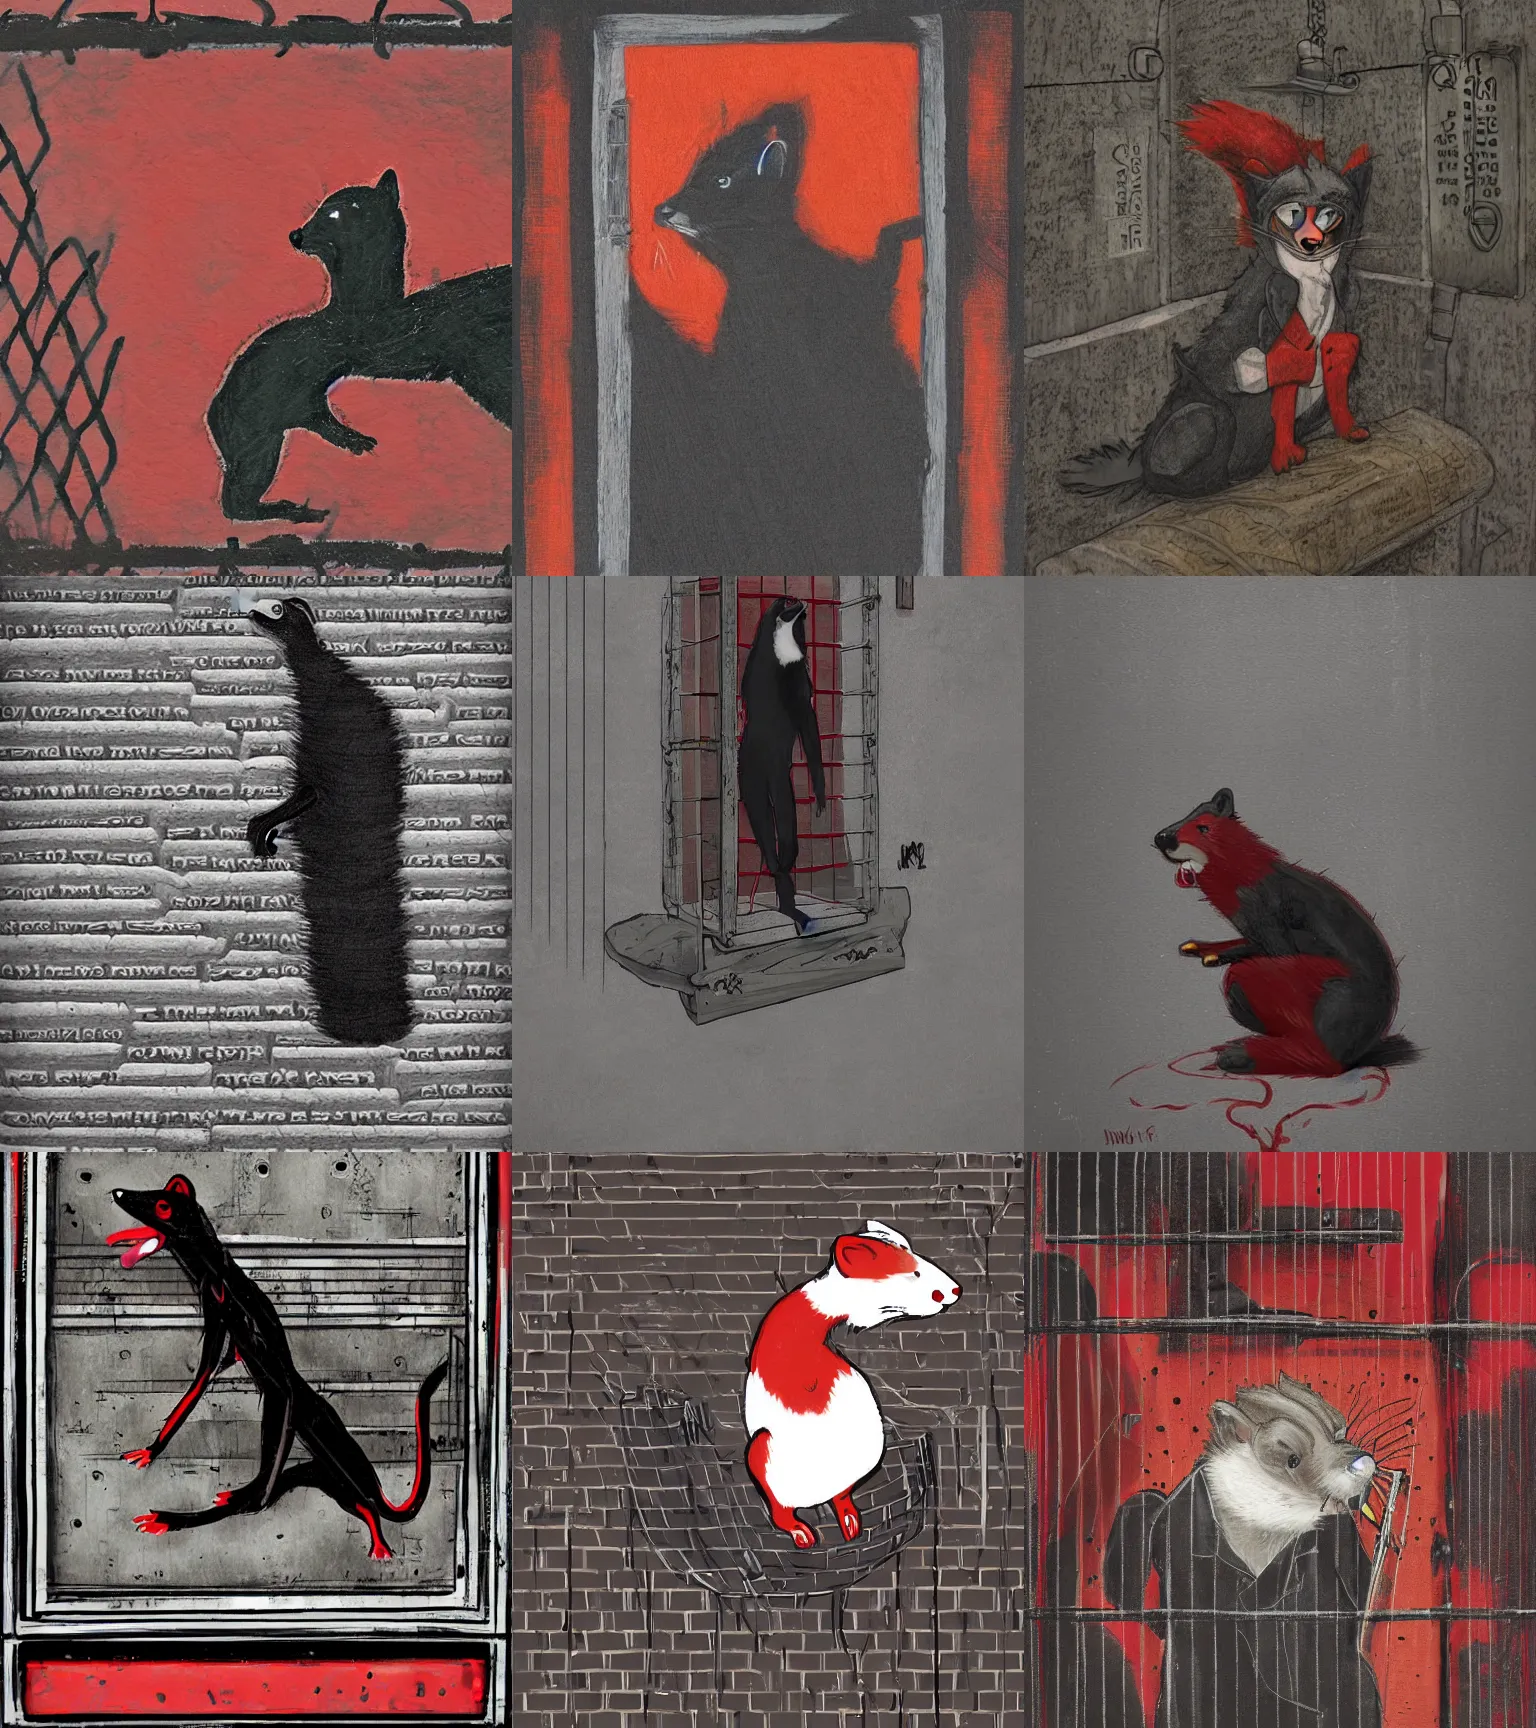 Prompt: red - and - black weasel / stoat fursona ( furry fandom ), neo - noir setting, detective fiction inspired art tone, artistic medium is scratching and chiseling on a prison cell wall in order to create cracks and impressions